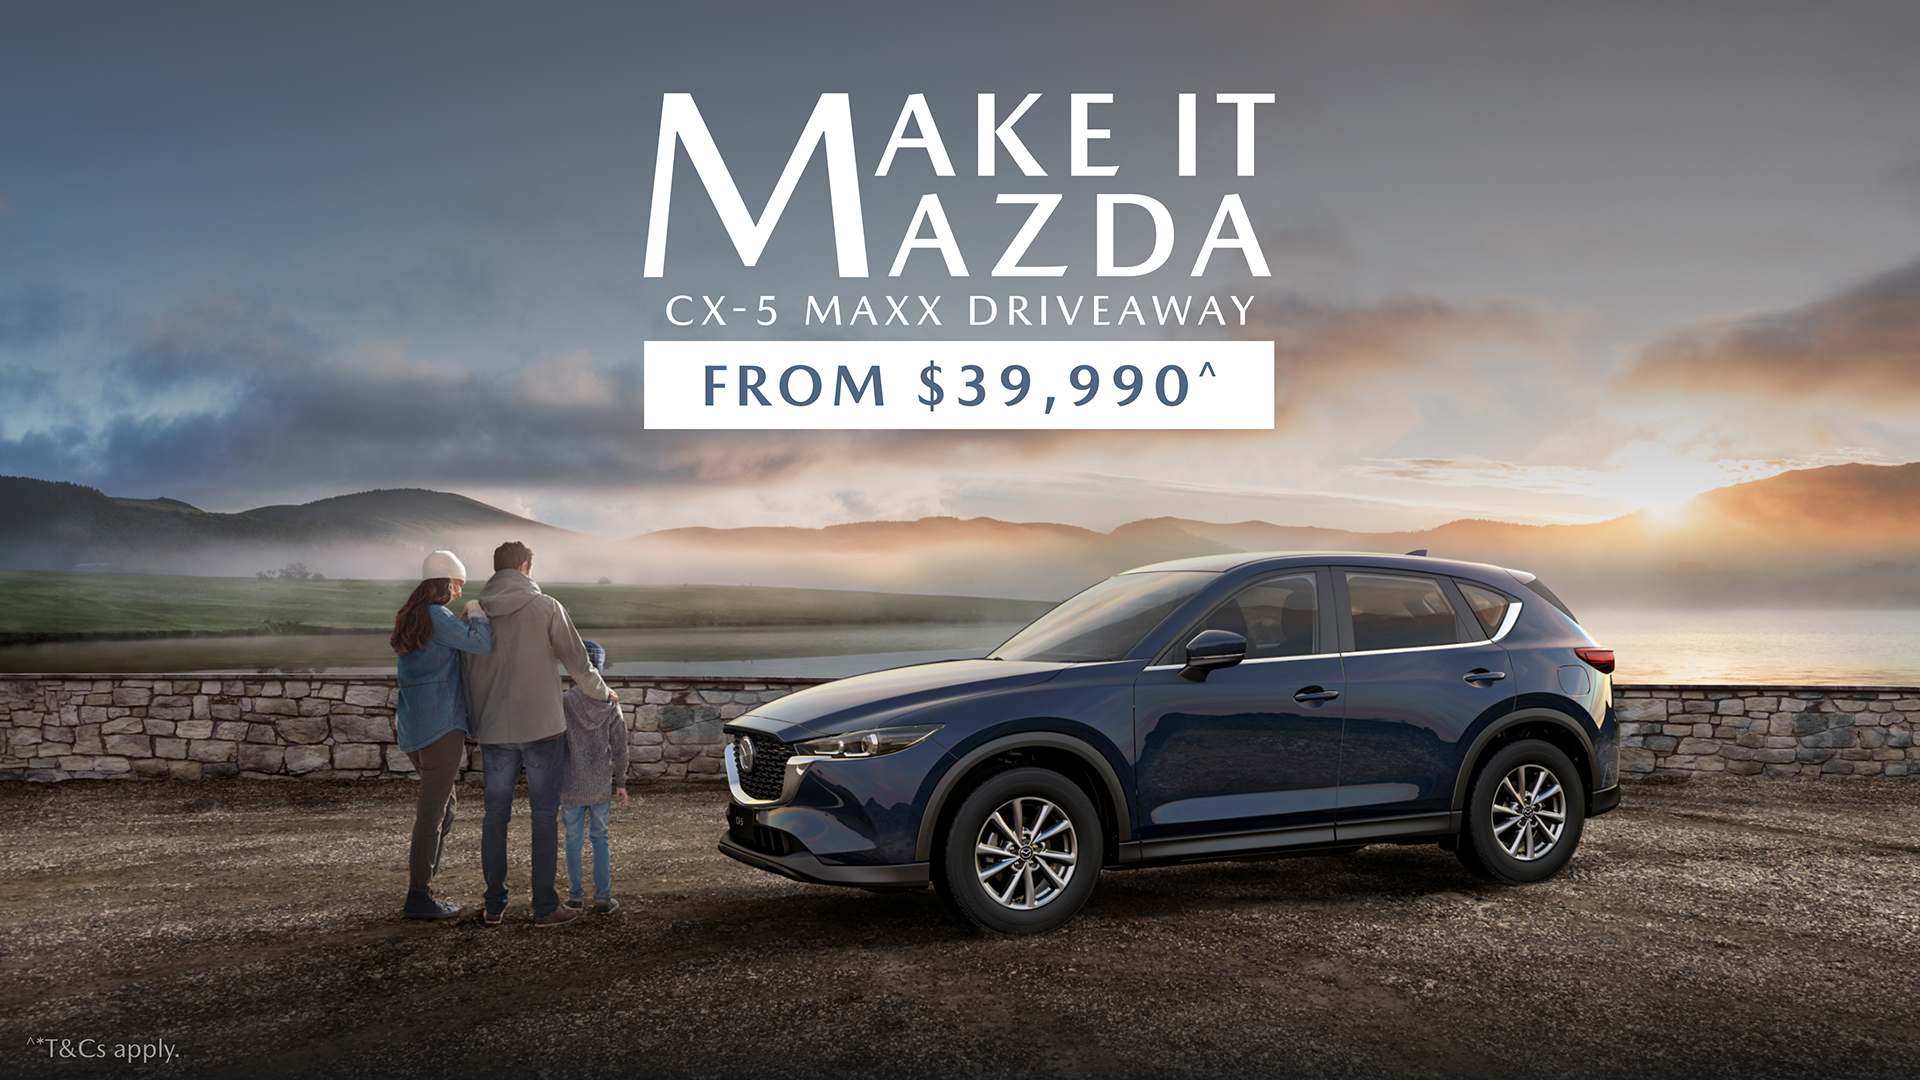 Mazda Offers